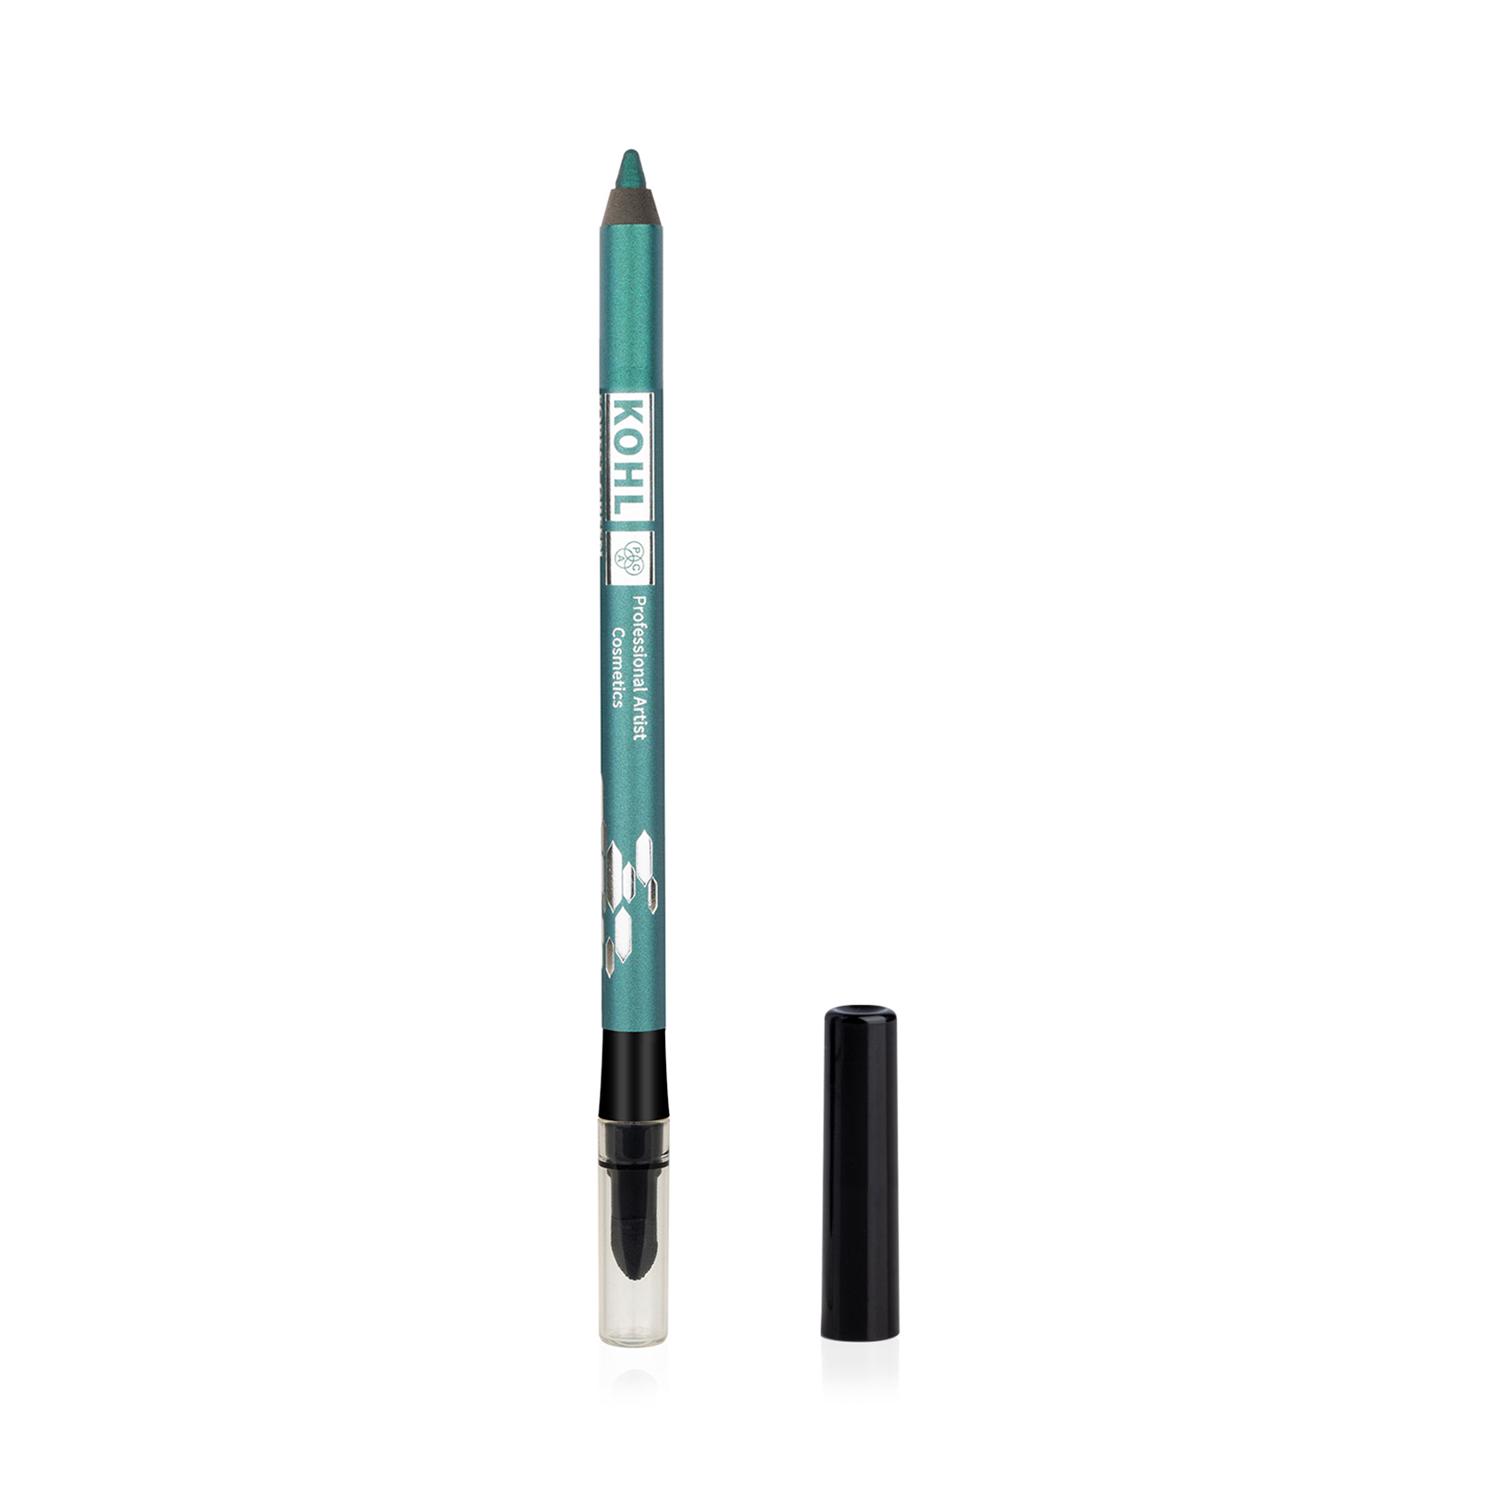 PAC | PAC Longlasting Kohl Pencil - Forest Green (1.2g)